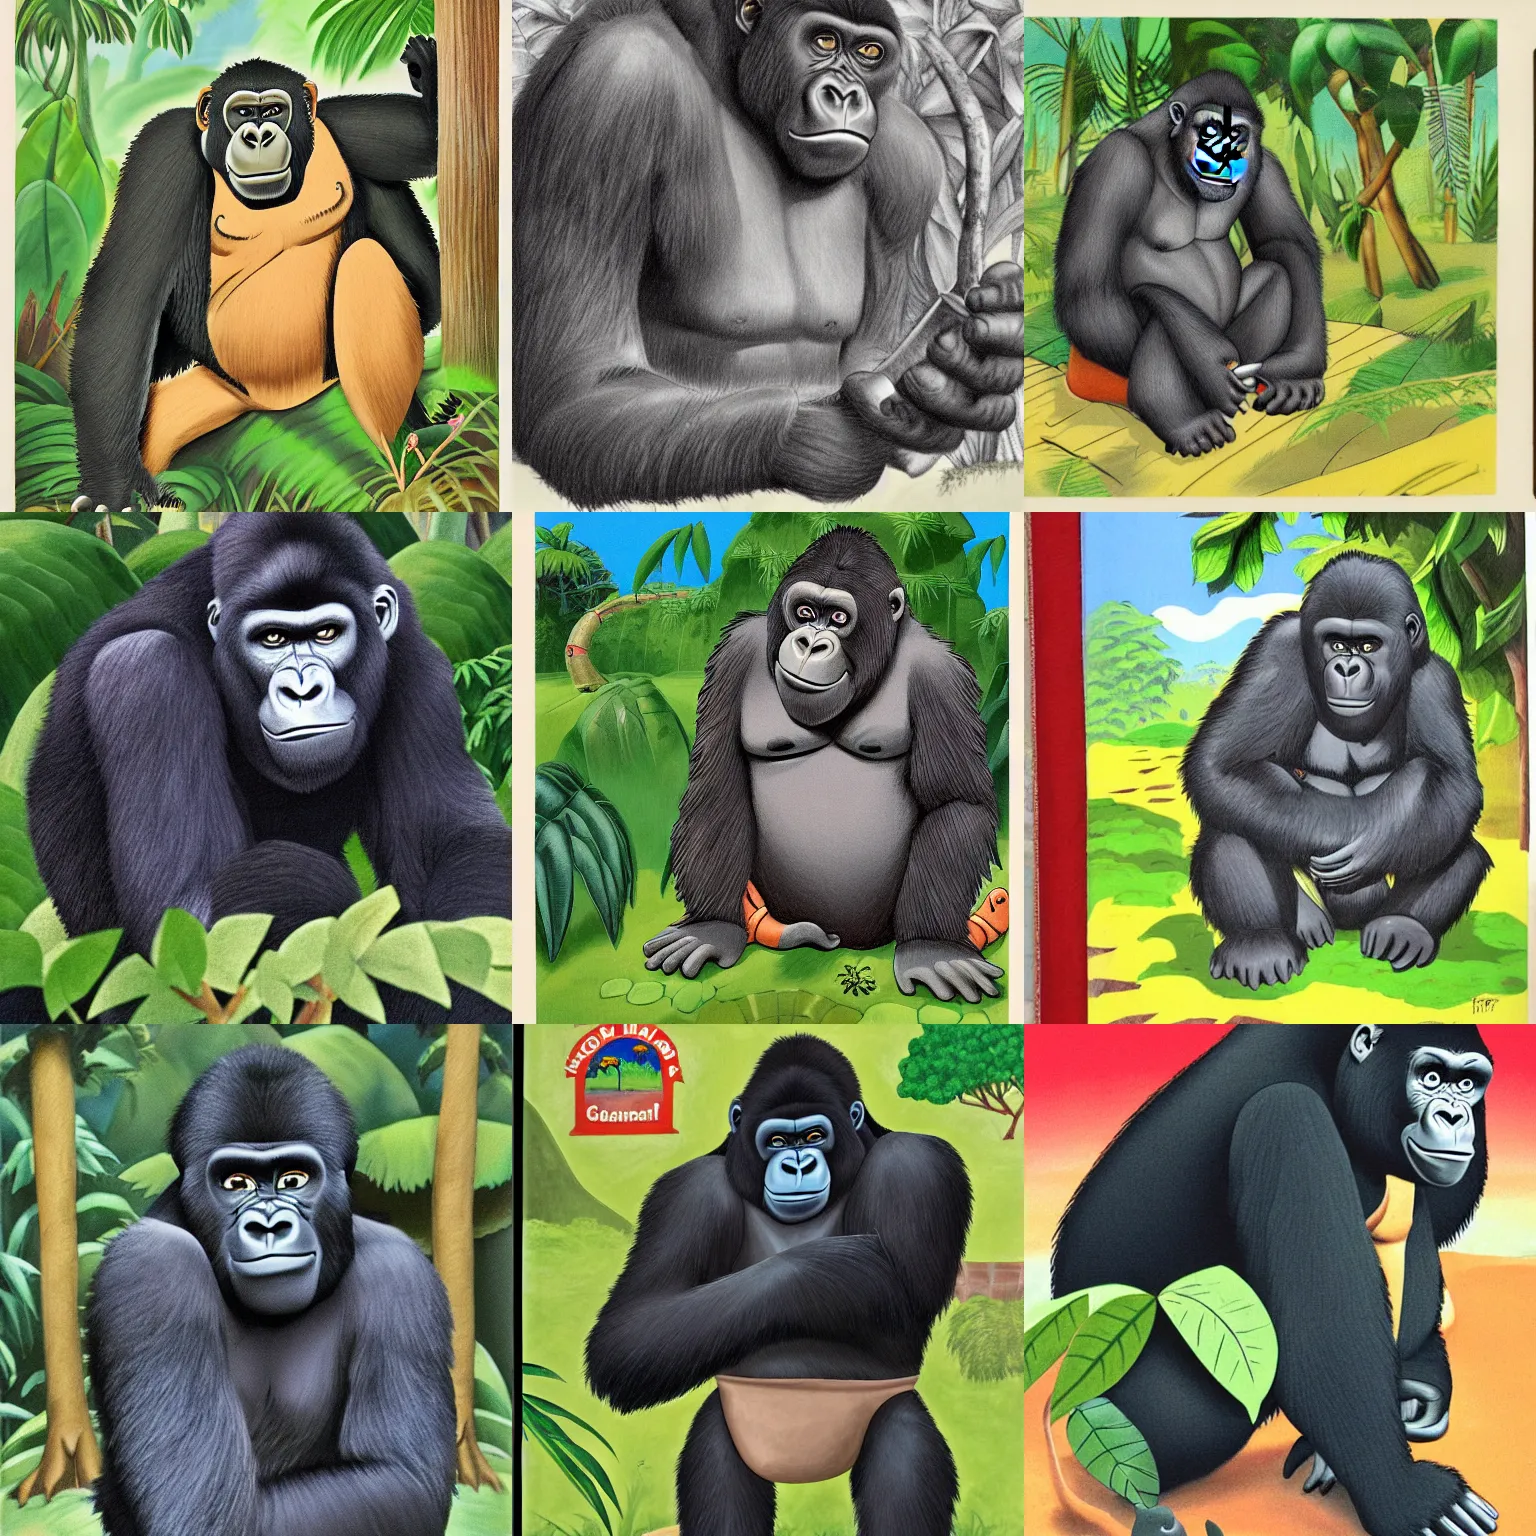 Prompt: a gorilla on the jungle crossing his arms and looking sad, children's book illustration, bob clampett